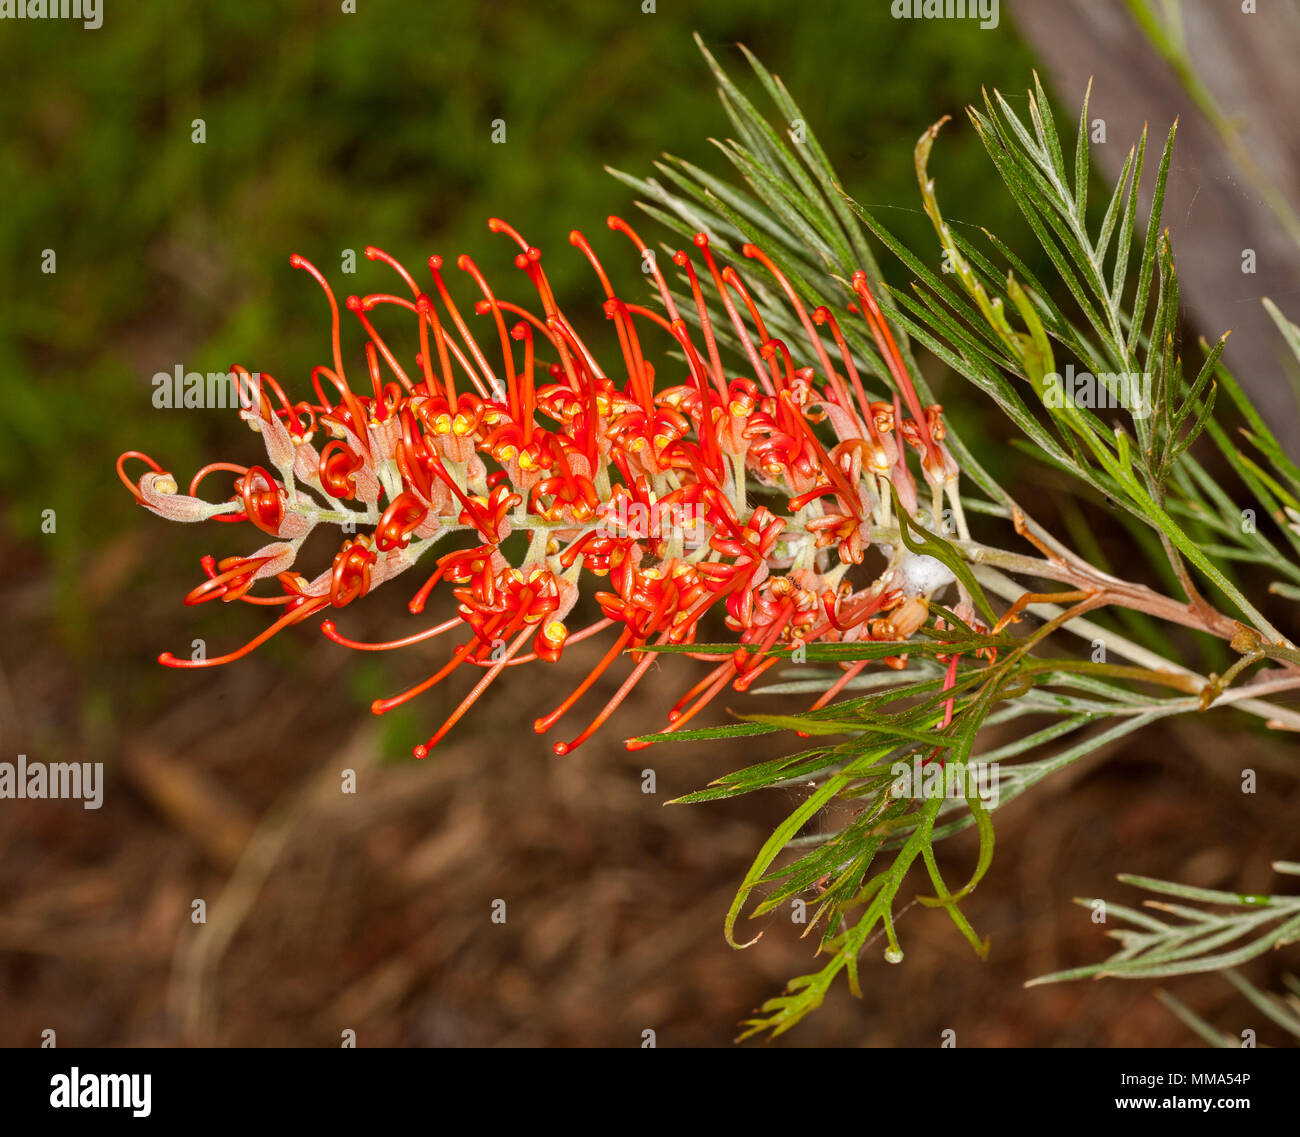 Spectacular vivid orange / red flower and green leaves of drought tolerant Australian native plant, Grevillea 'Jester' against brown background Stock Photo